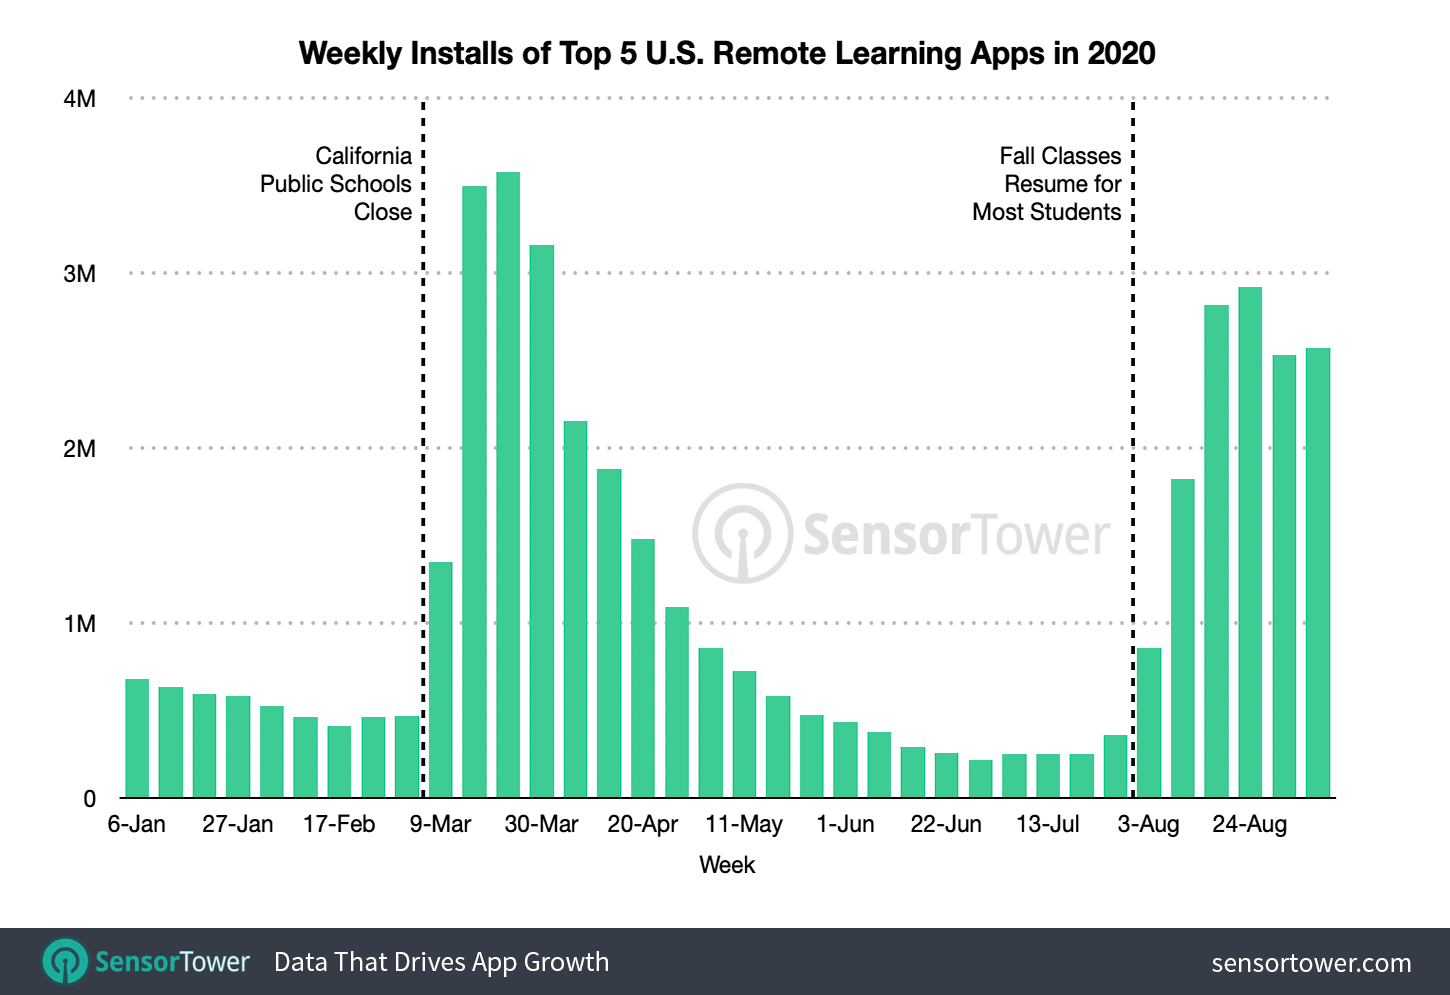 The top five U.S. remote learning apps saw their installs decrease by 13% from the spring to fall semester